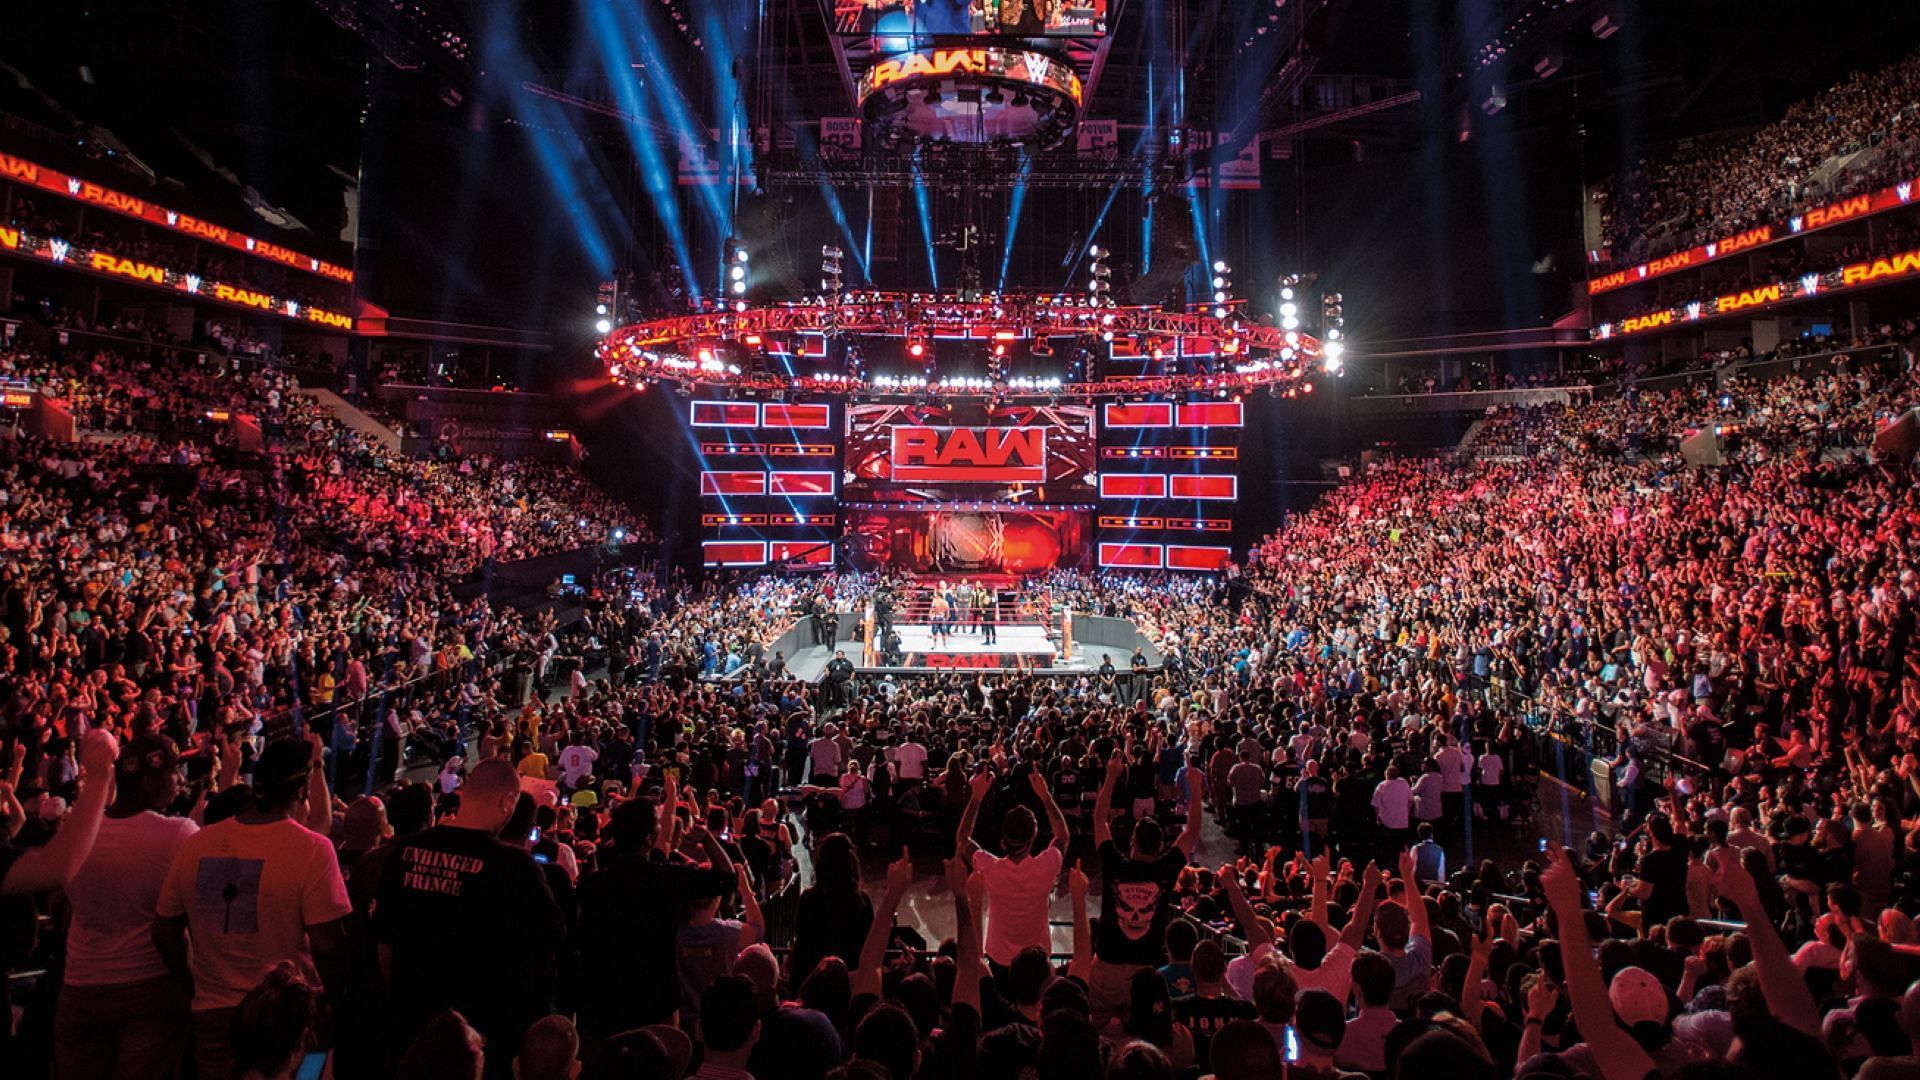 The WWE RAW logo and stage/set on display inside arena